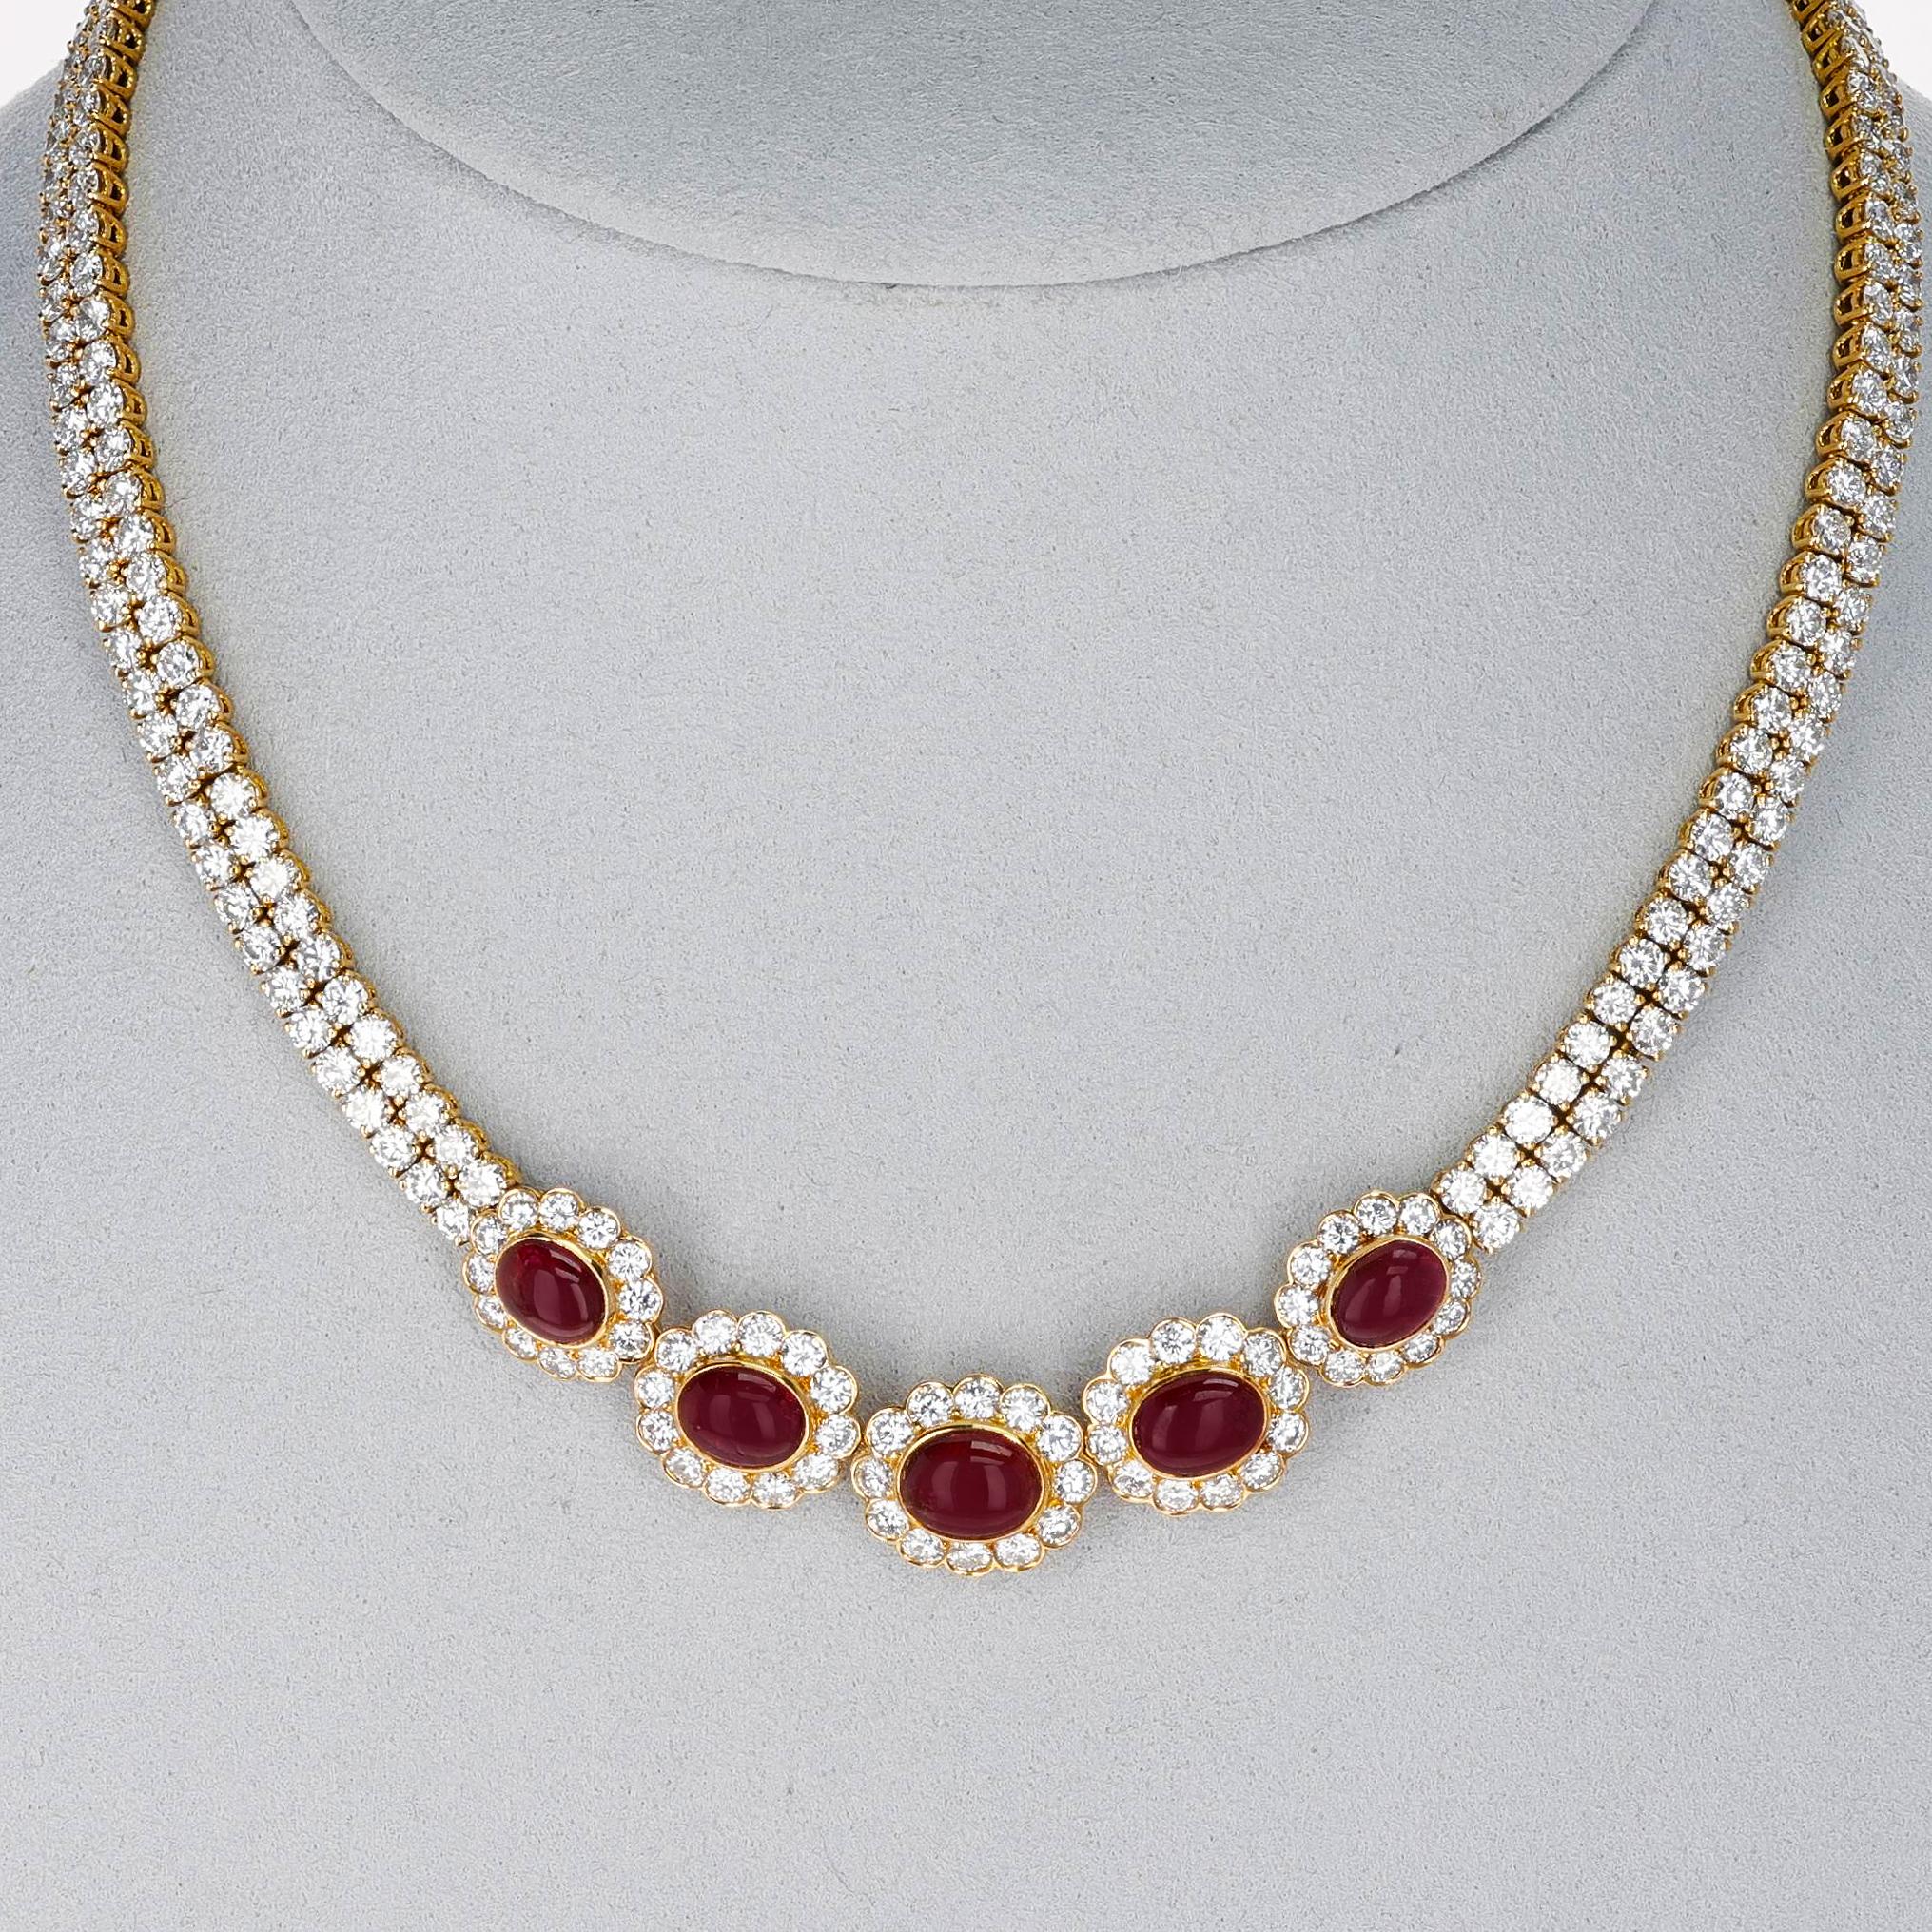 Van Cleef & Arpels Ruby Cabochon and Diamond Bracelet and Necklace Set, 18k For Sale 1